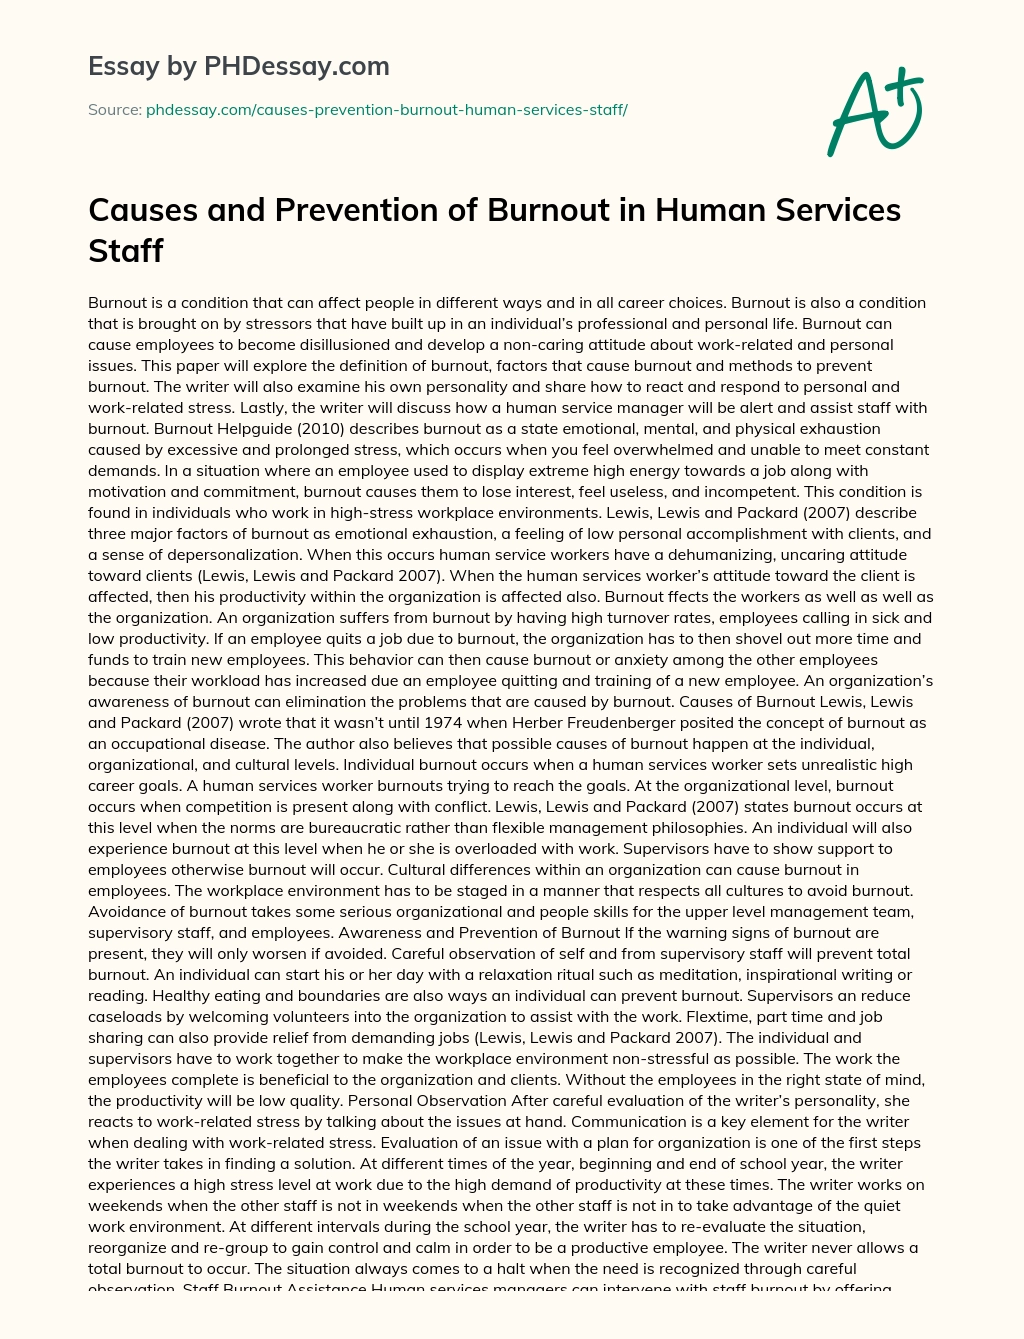 Causes and Prevention of Burnout in Human Services Staff essay